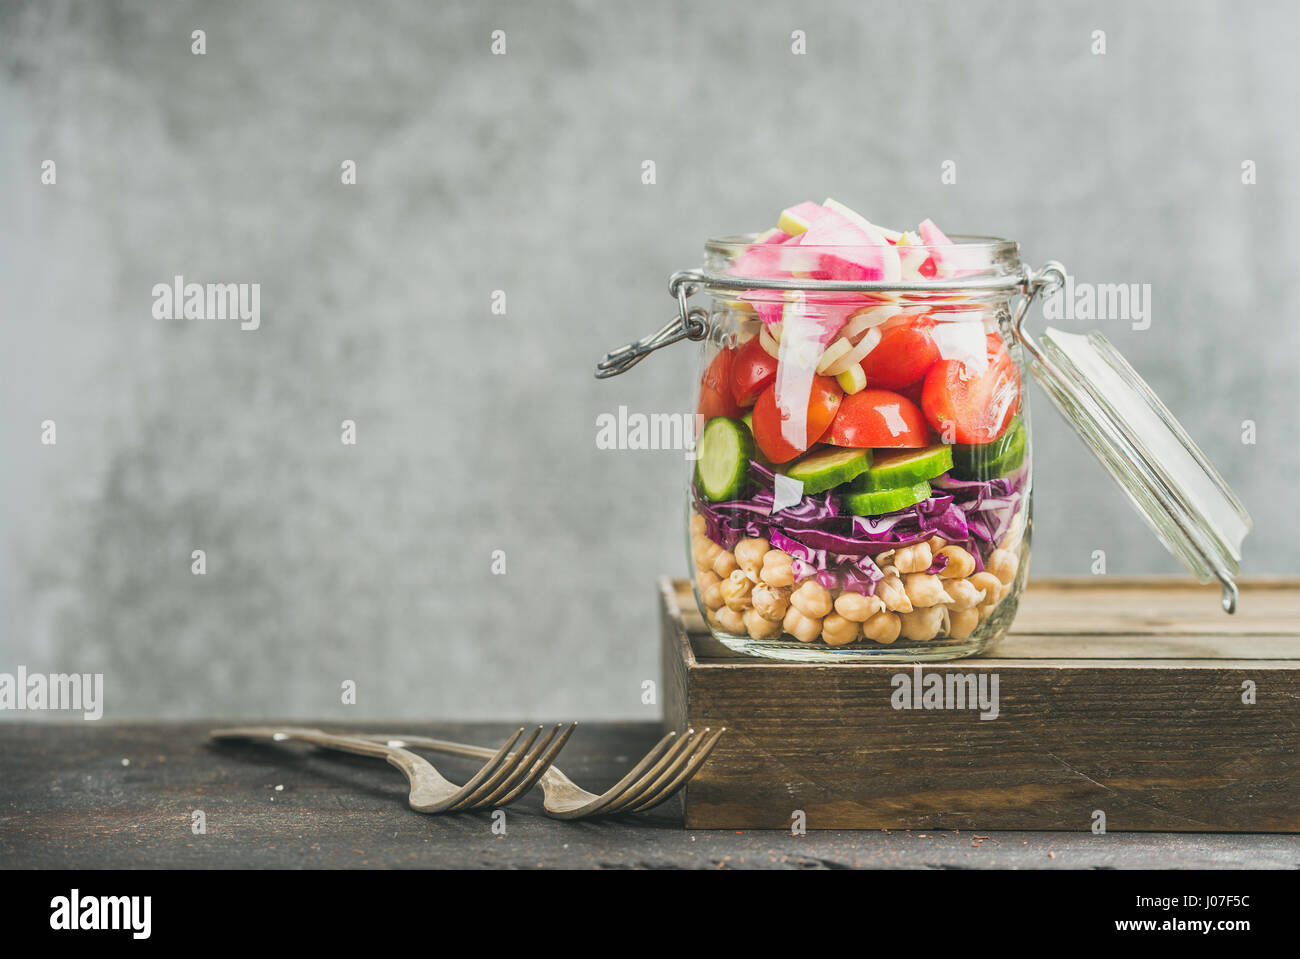 Healthy take-away lunch jar with vegetables and chickpea sprouts Stock Photo